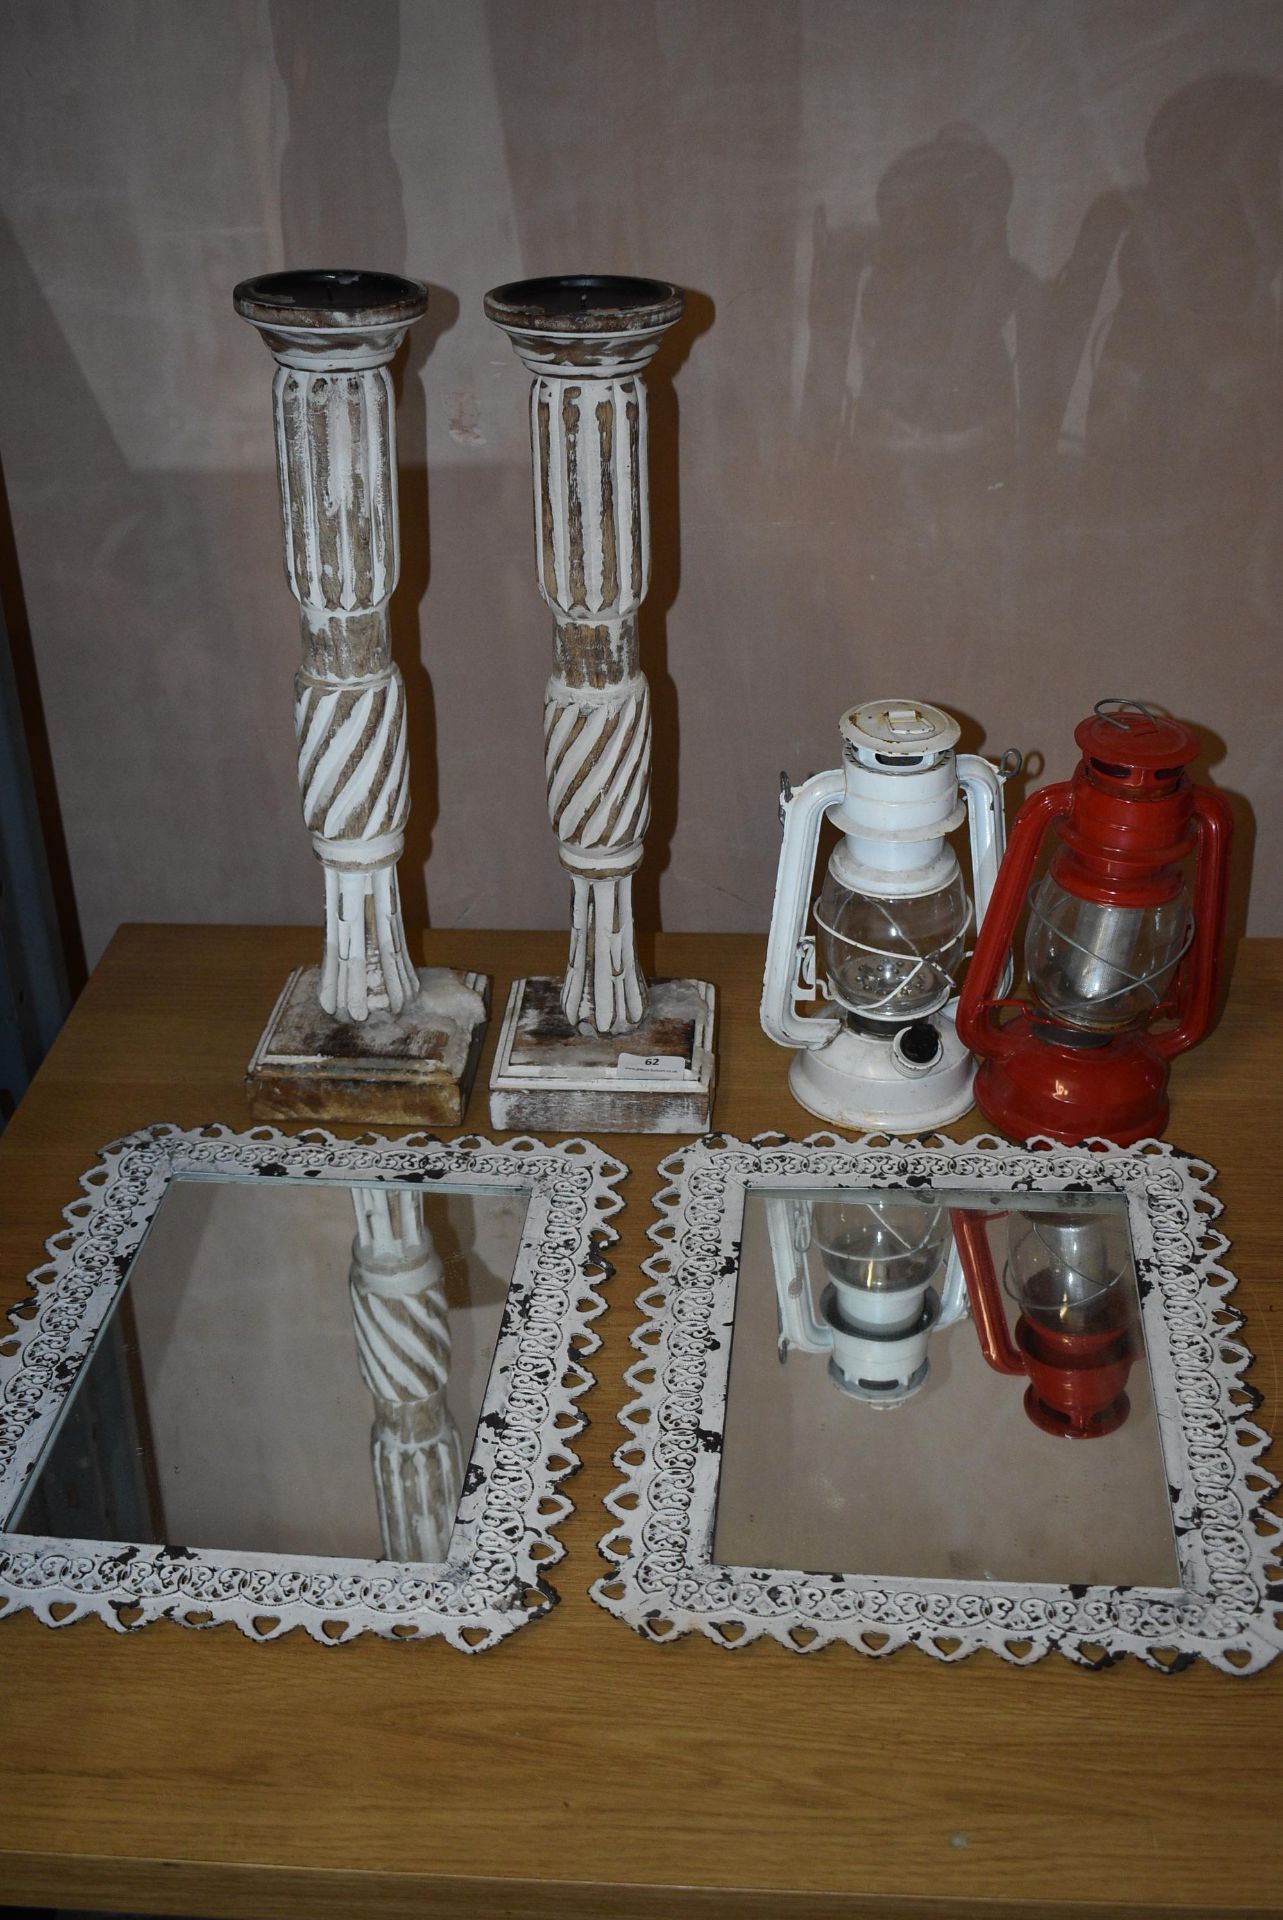 *Pair of Ornate Candlesticks, Two Decorative Hurricane Lamps, and a Pair of Metal Framed Mirrors